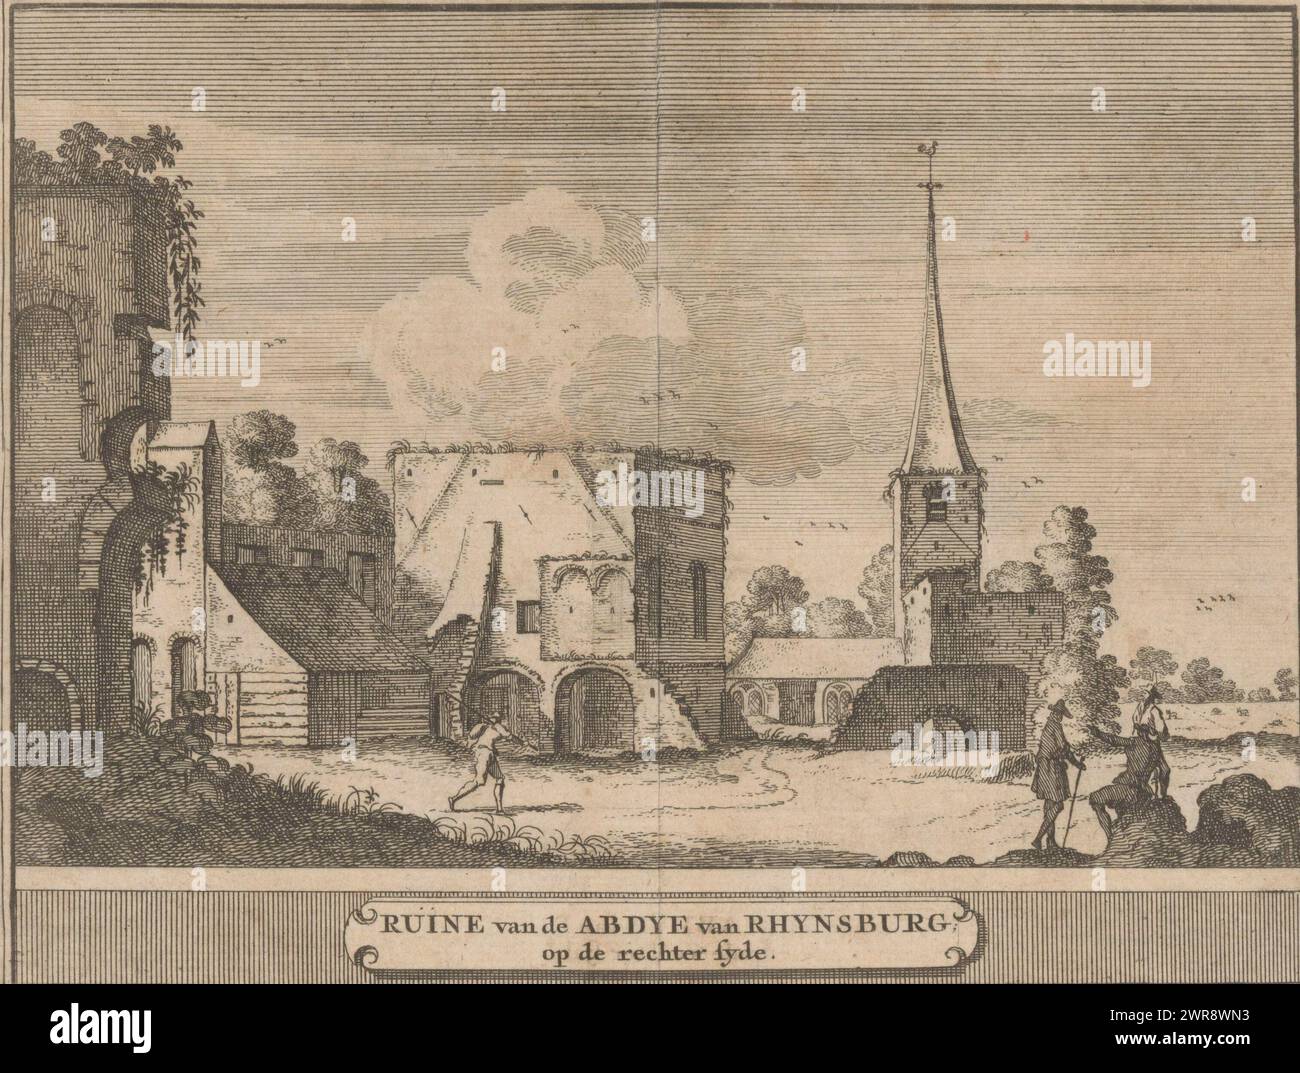 View of the ruins of the abbey at Rijnsburg, Ruin of the abbey of Rhynsburg; on the right side (title on object), View of the right side of the ruins of the Rijnsburg Abbey, destroyed in 1574., print maker: Jacobus Schijnvoet, after drawing by: Roelant Roghman, (possibly), Amsterdam, 1711 - 1774, paper, etching, height 141 mm × width 179 mm, print Stock Photo